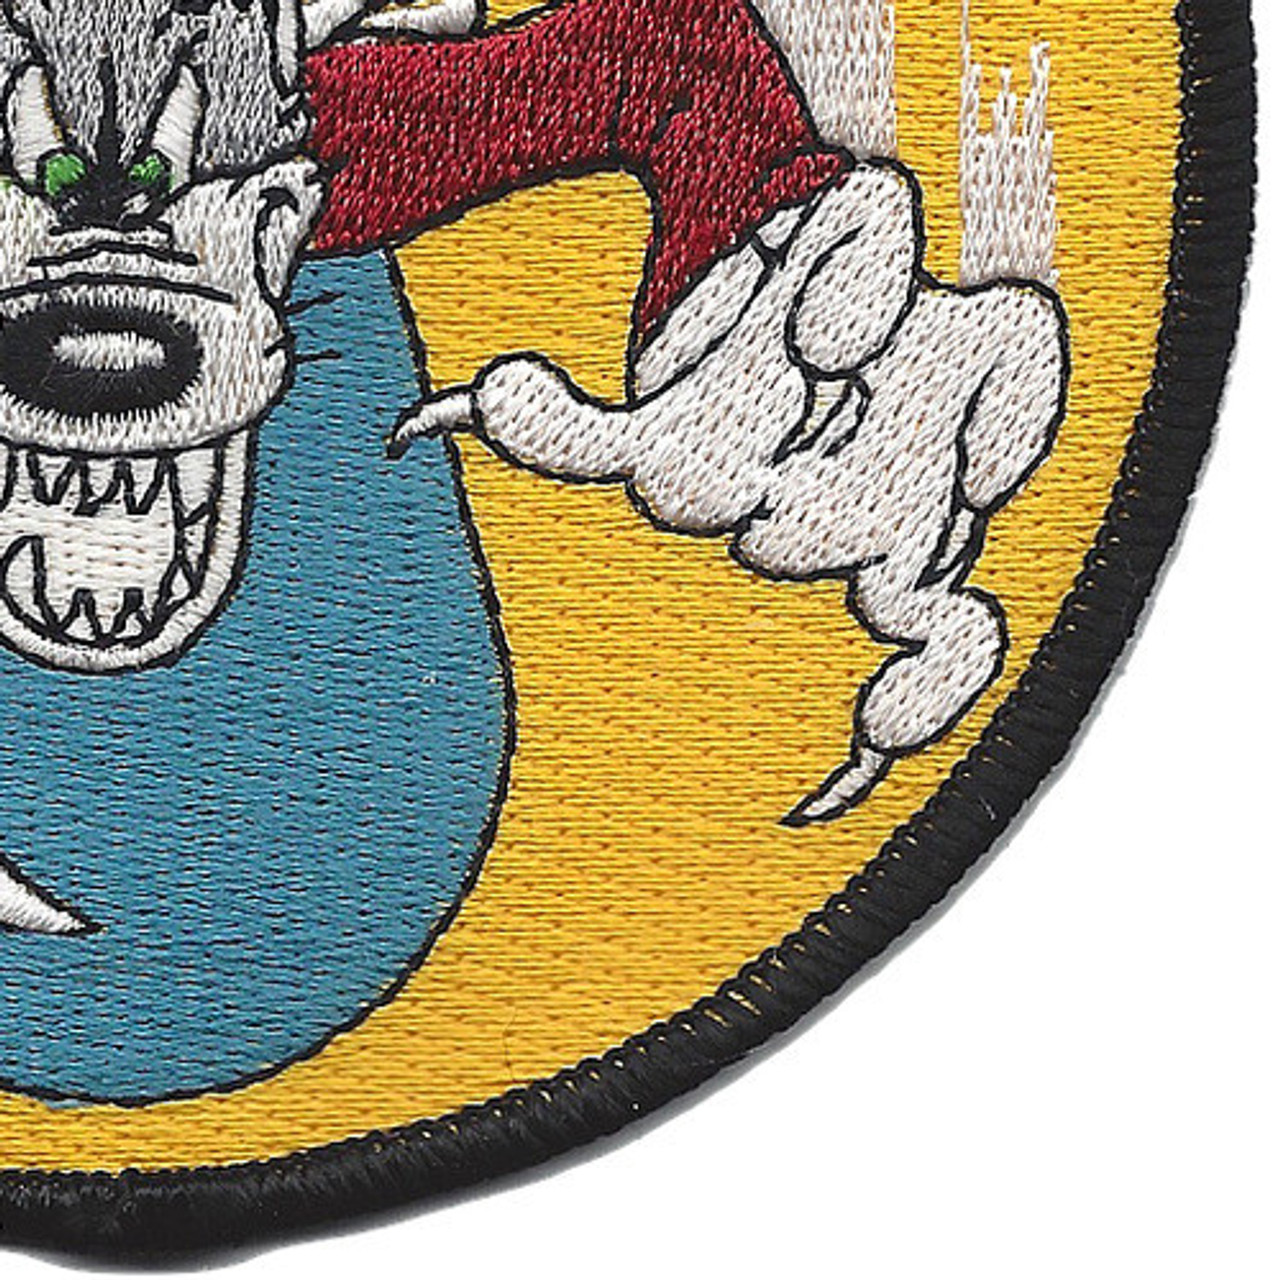 US Navy VT-60 Torpedo Squadron WWII Patch